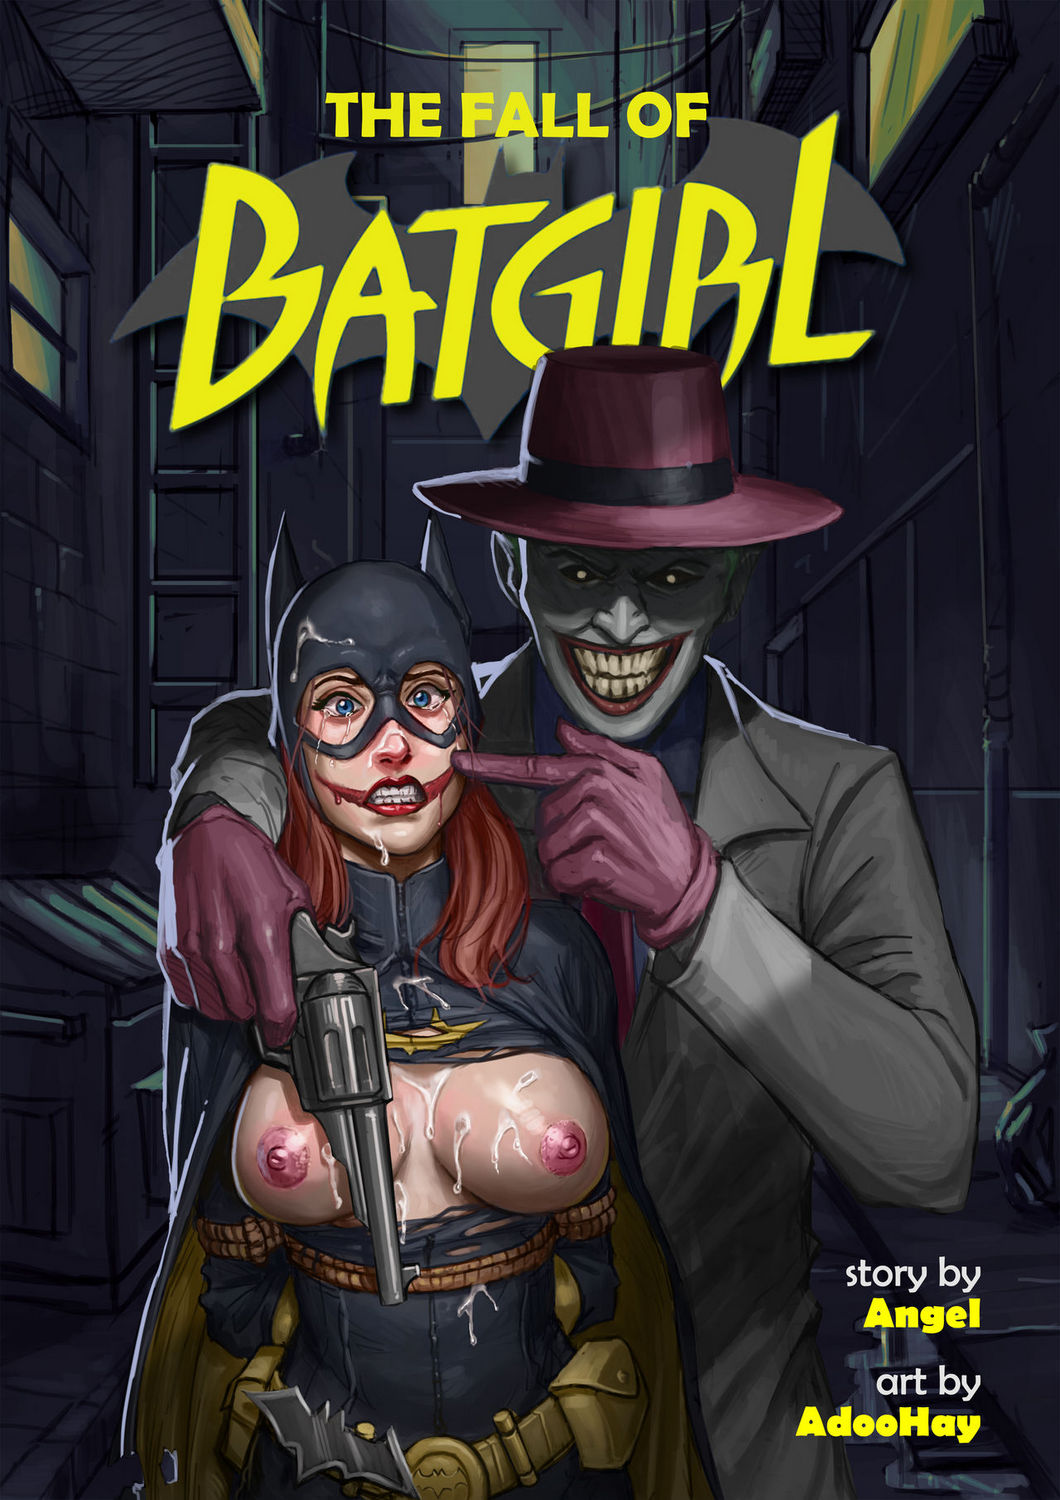 Cover The Fall Of Batgirl